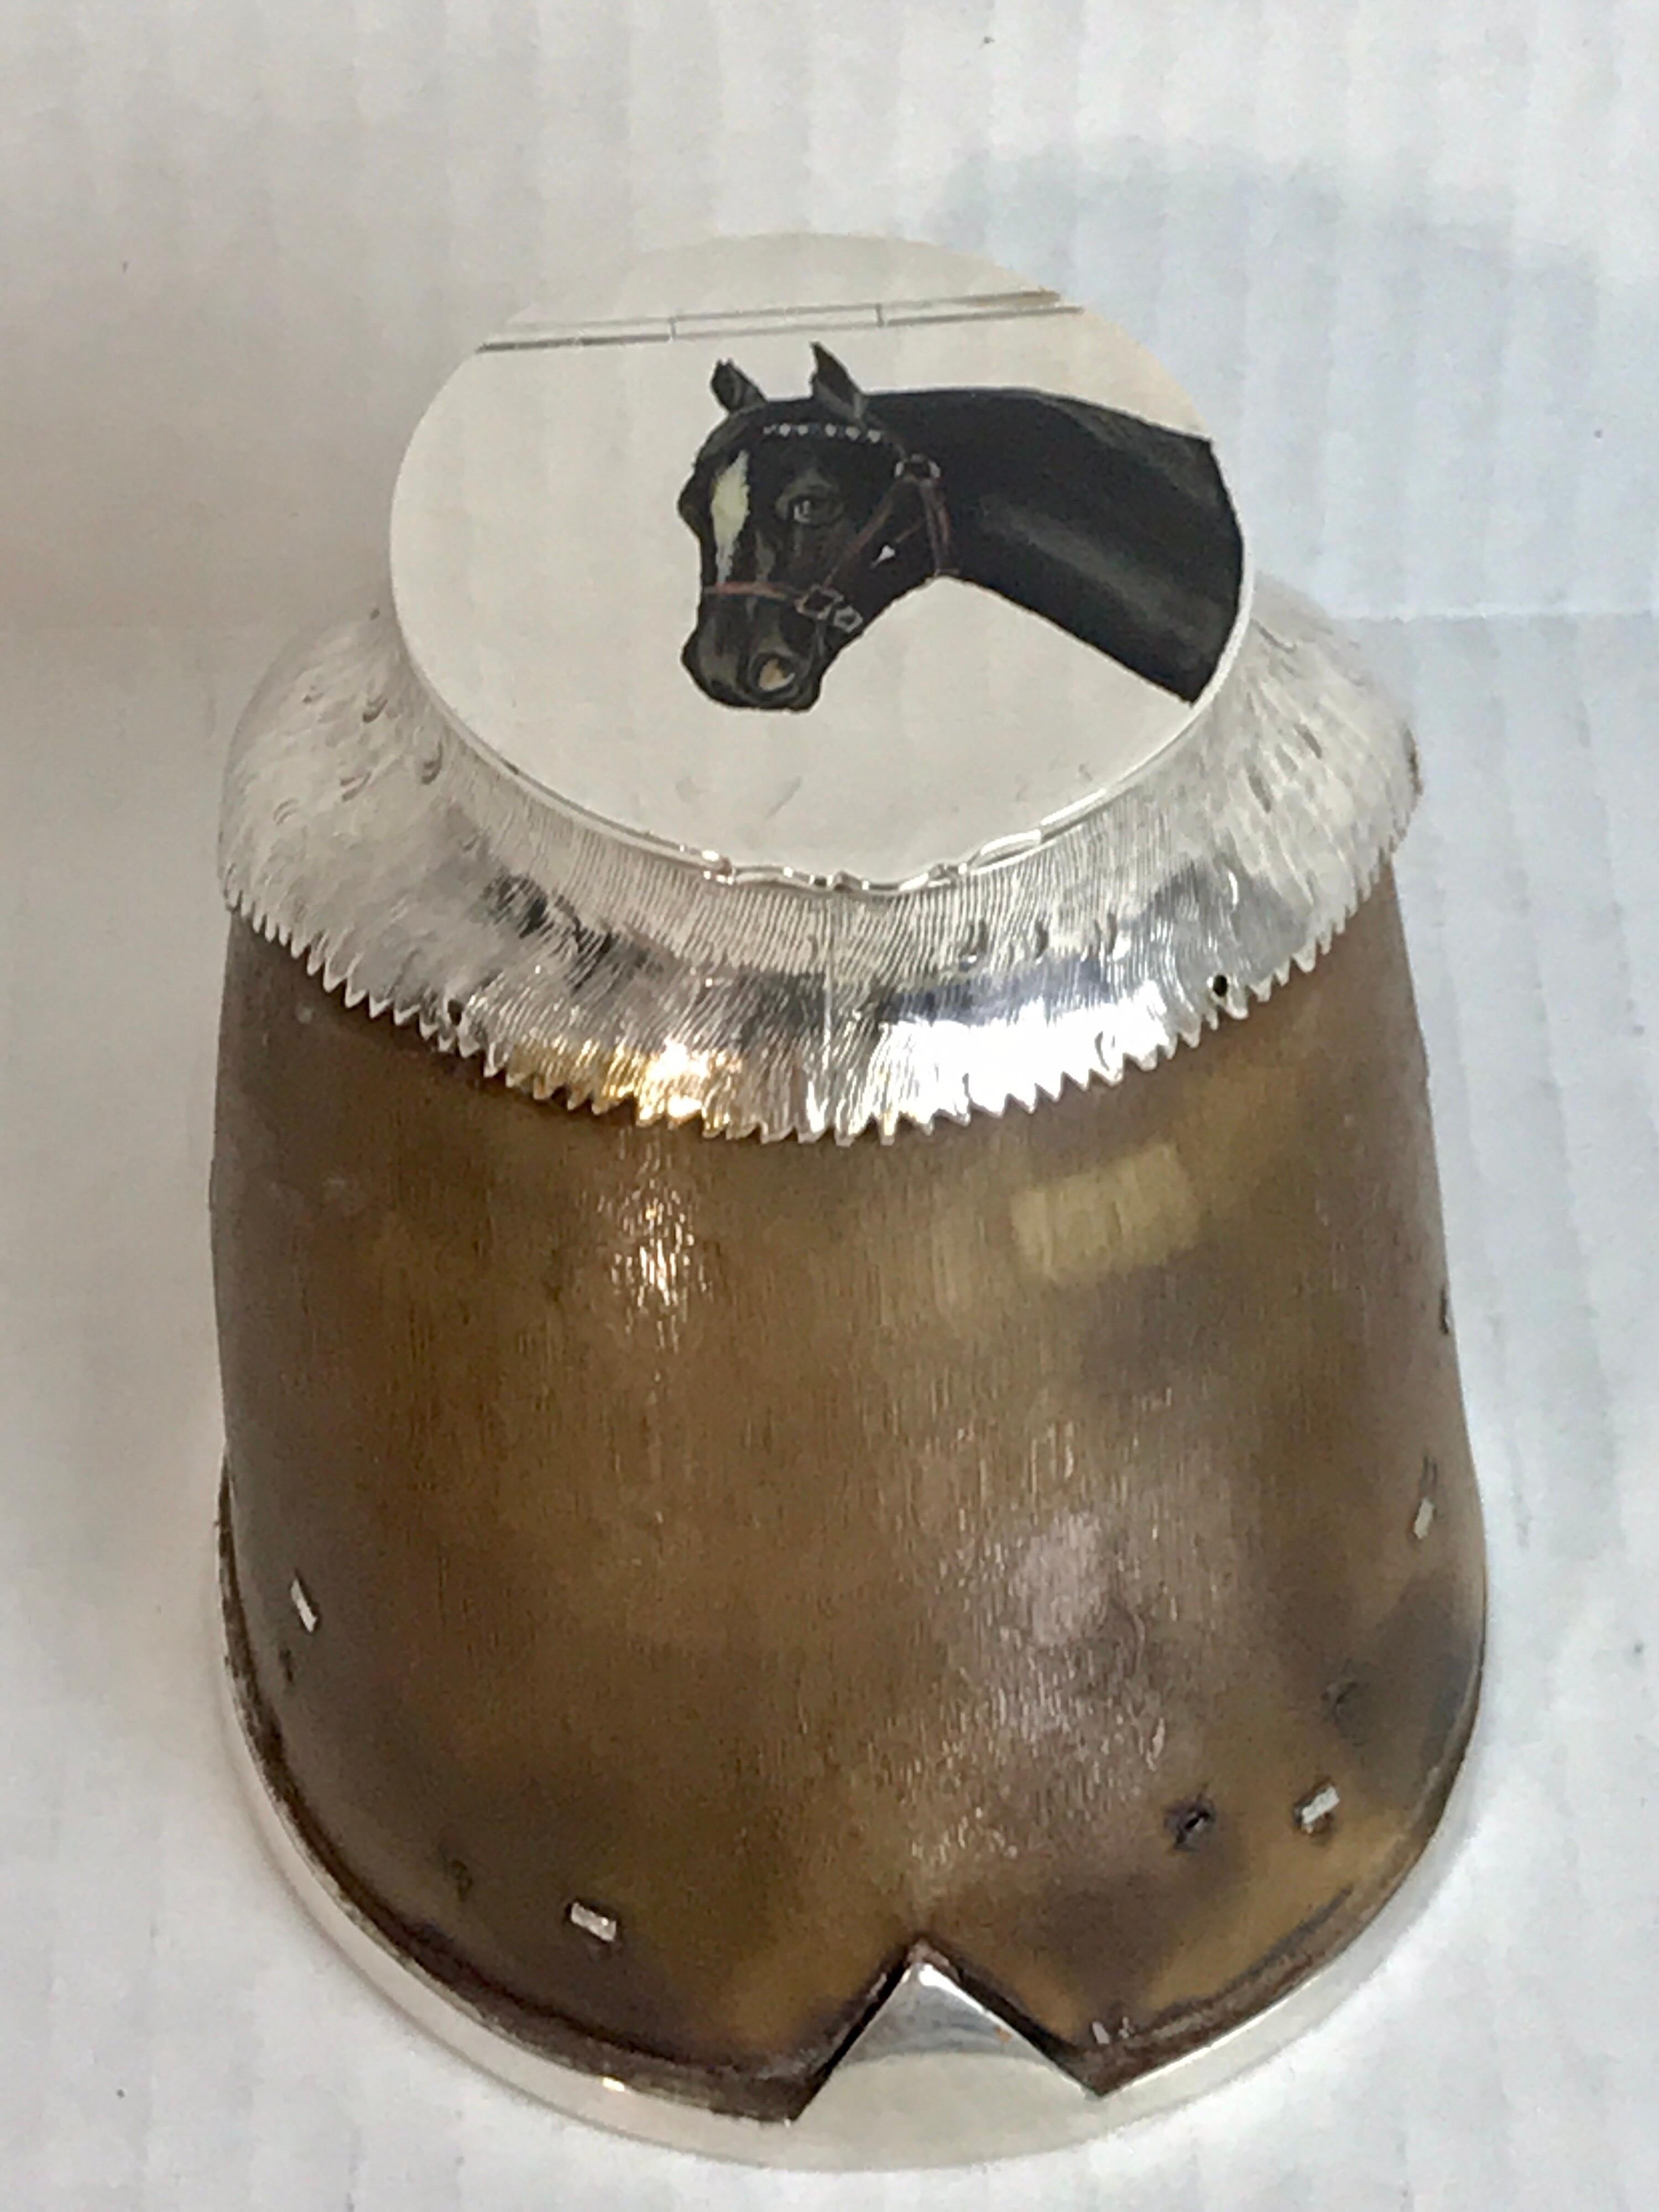 English Officers Equestrian silver plate, enamel and hoof inkwell, an exquisite example with a portrait of the beloved horse, expertly mounted, possibly by Elkington & Co. Unmarked
Commemorative Horse Hoofs, from the mid-1800s to early 1900s